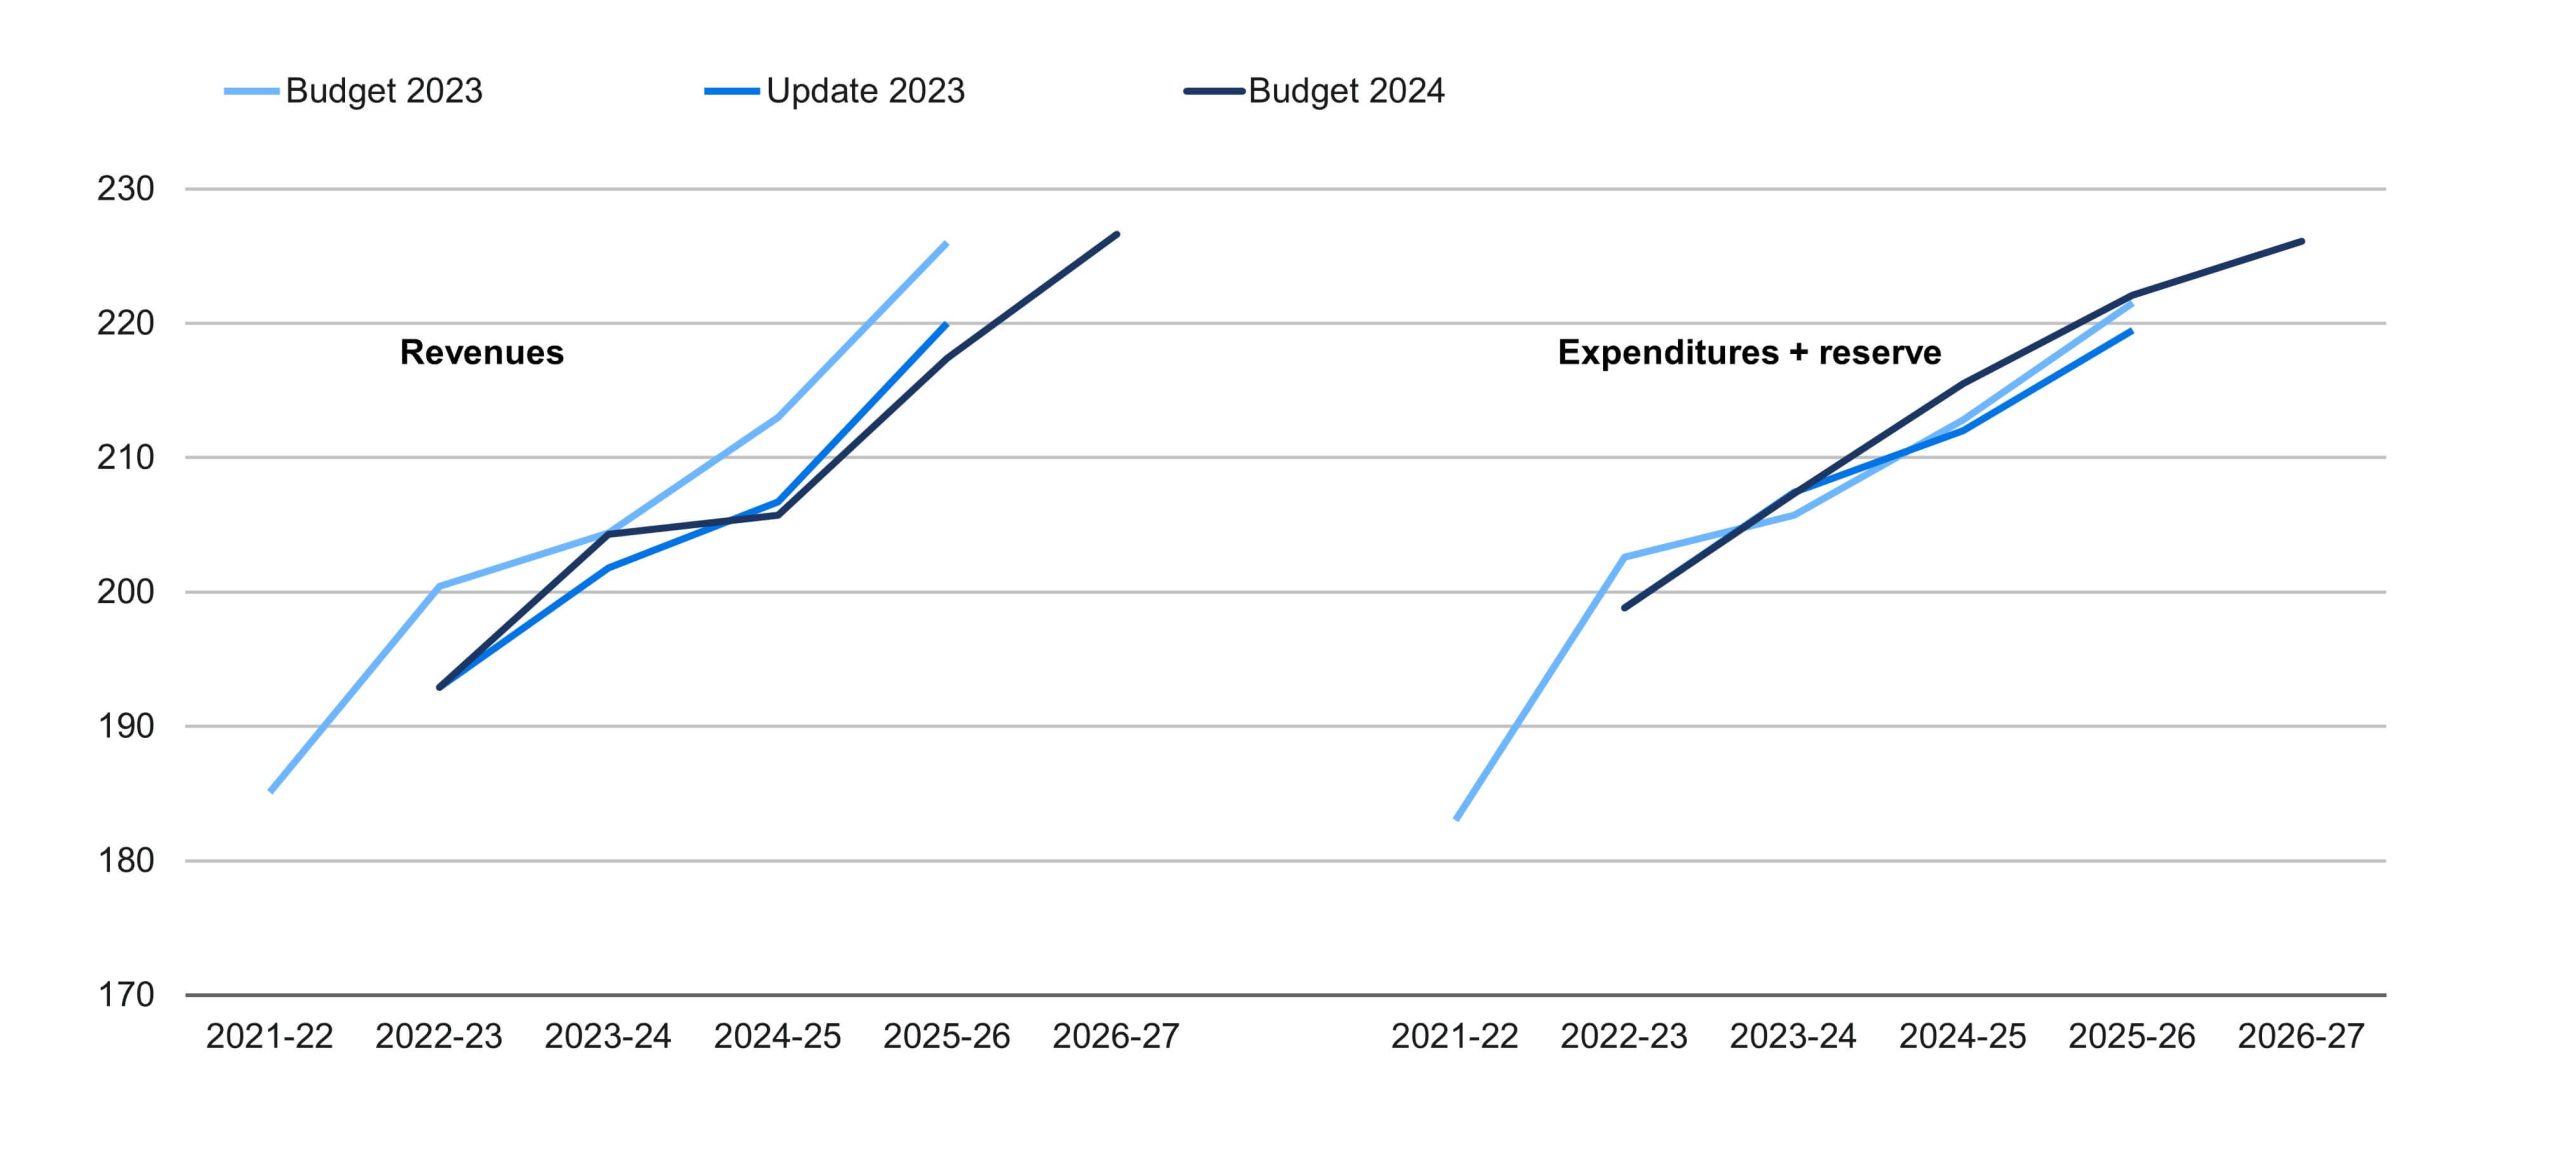 Line chart showing the medium-term revenue and expenditure projections from the 2024 Ontario Budget along with the previous projections from 2023